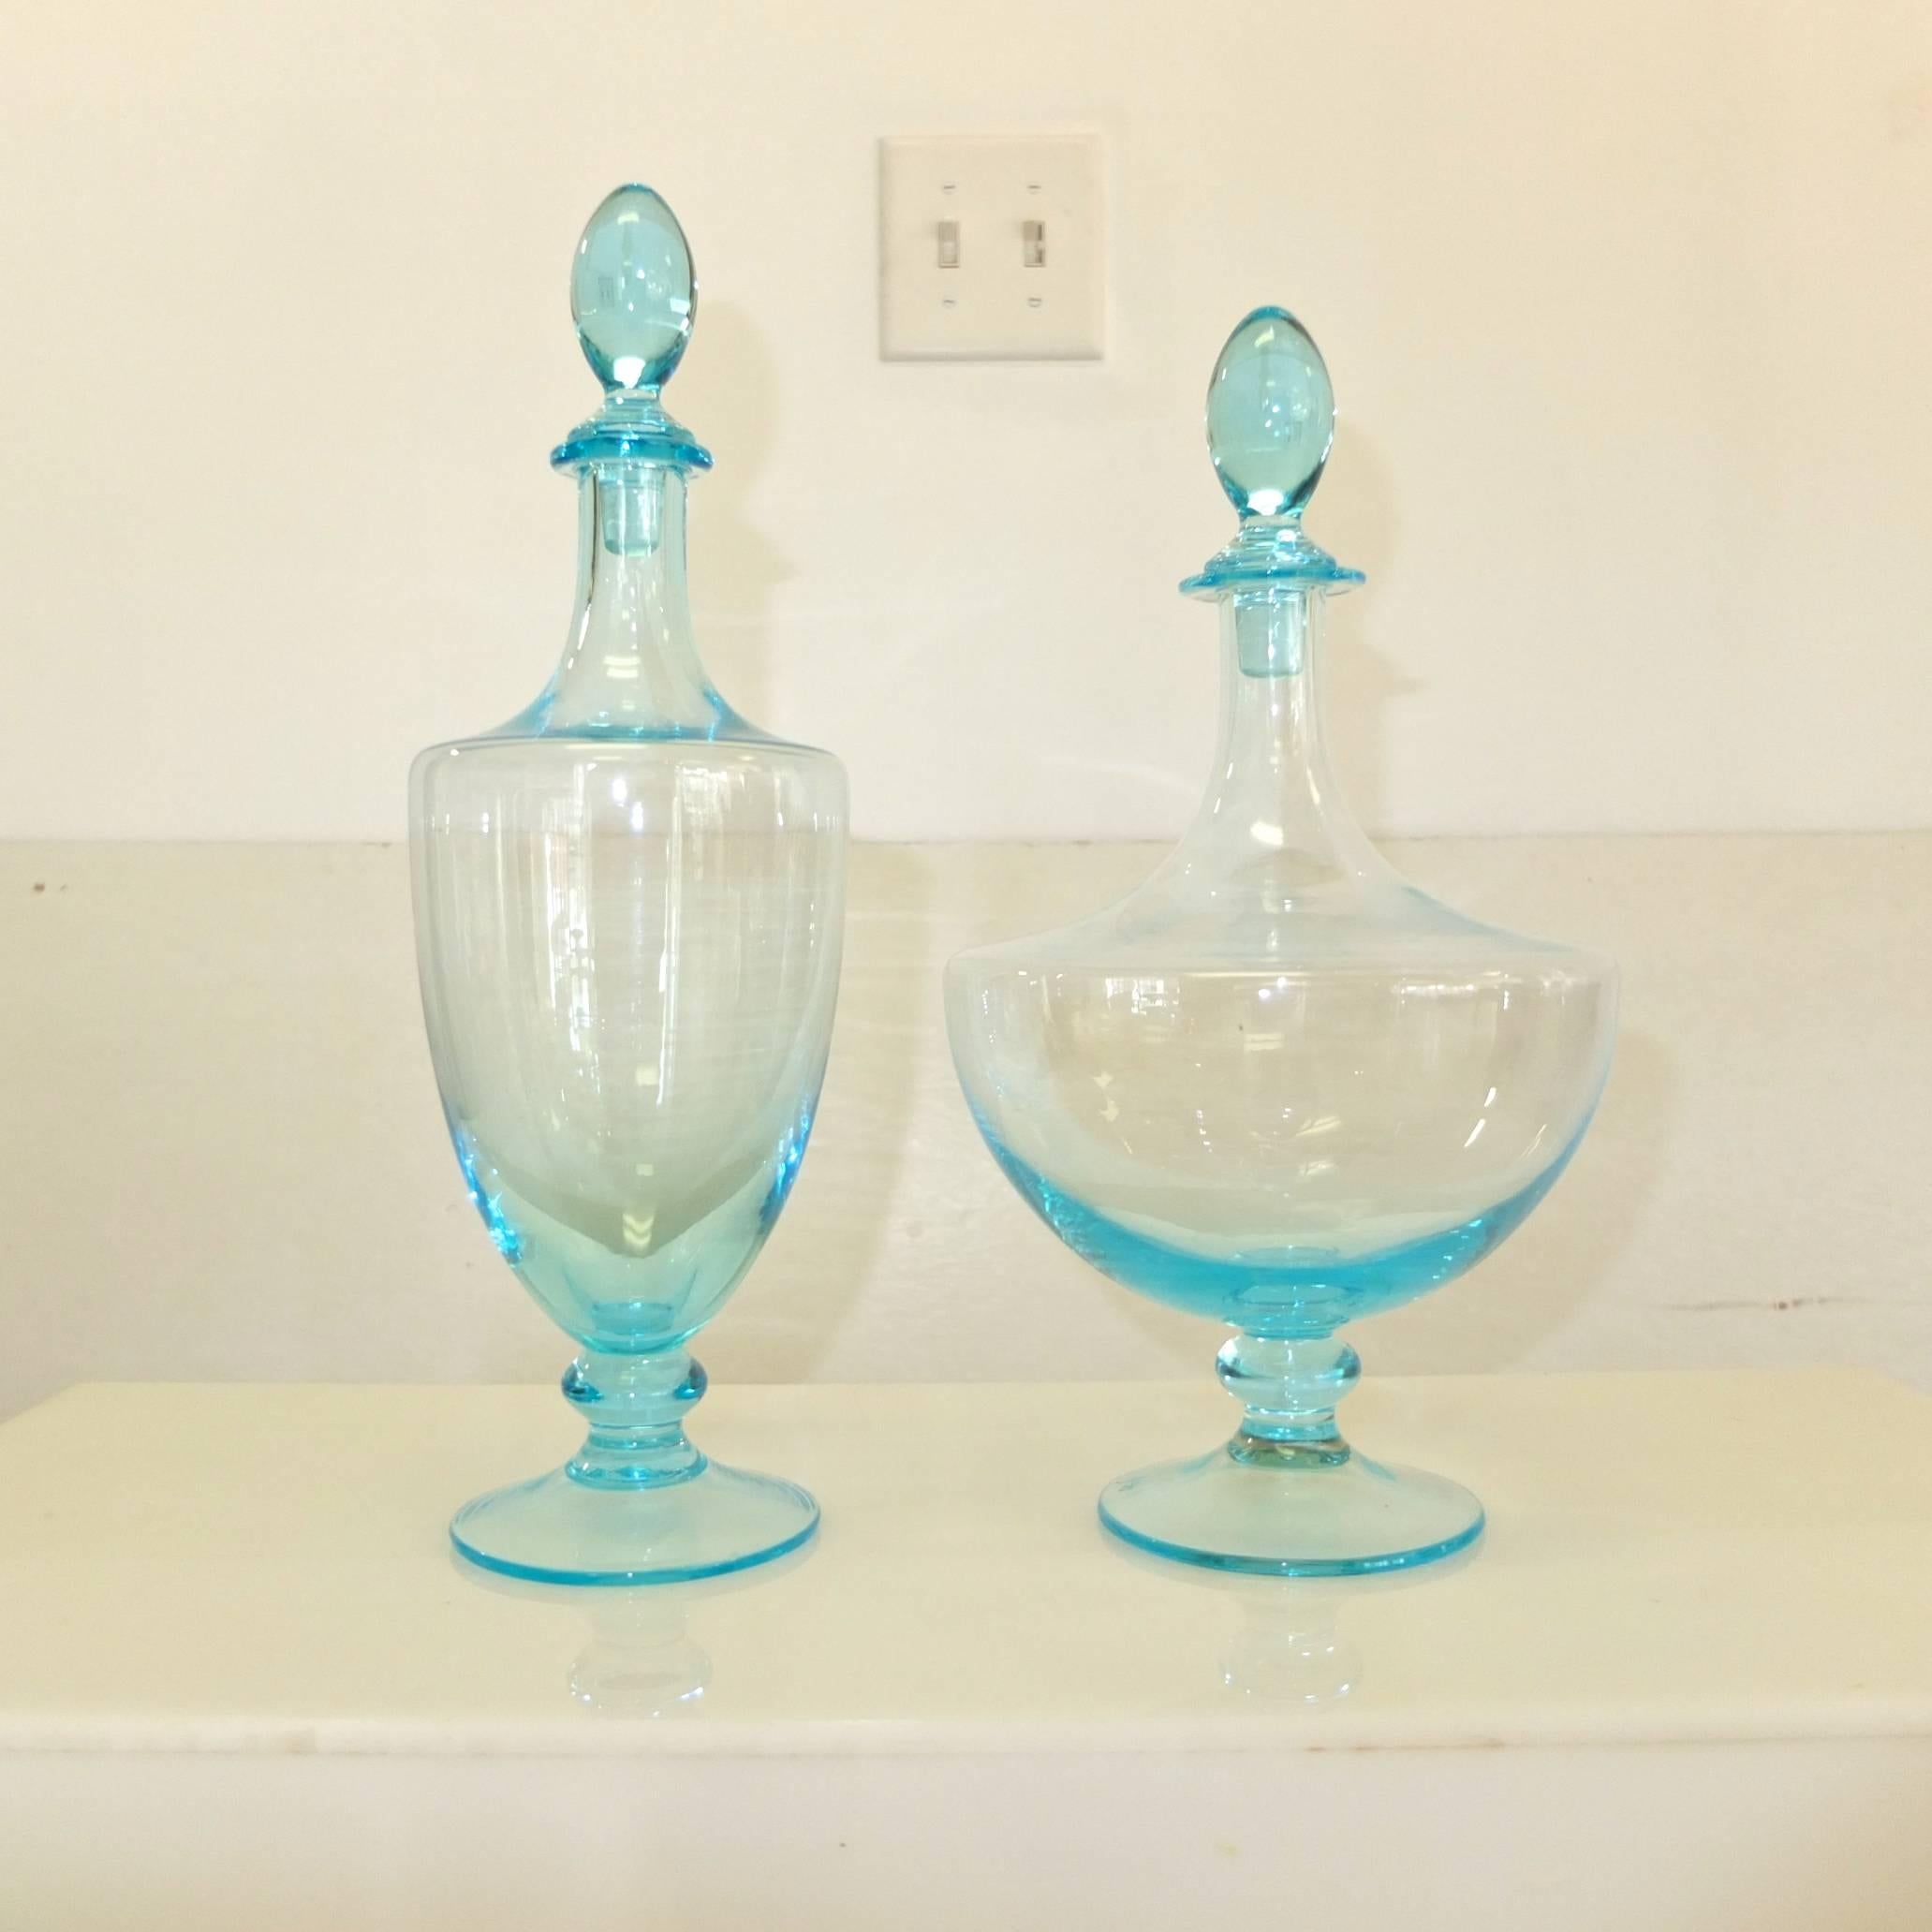 Stunning classical form handblown blue glass decanters. Signed and dated 1990 but I can't decipher the signature. See image 8. 

The crystal clear ice blue color is arresting.

The forms are stylized amphora footed bottle vessels with